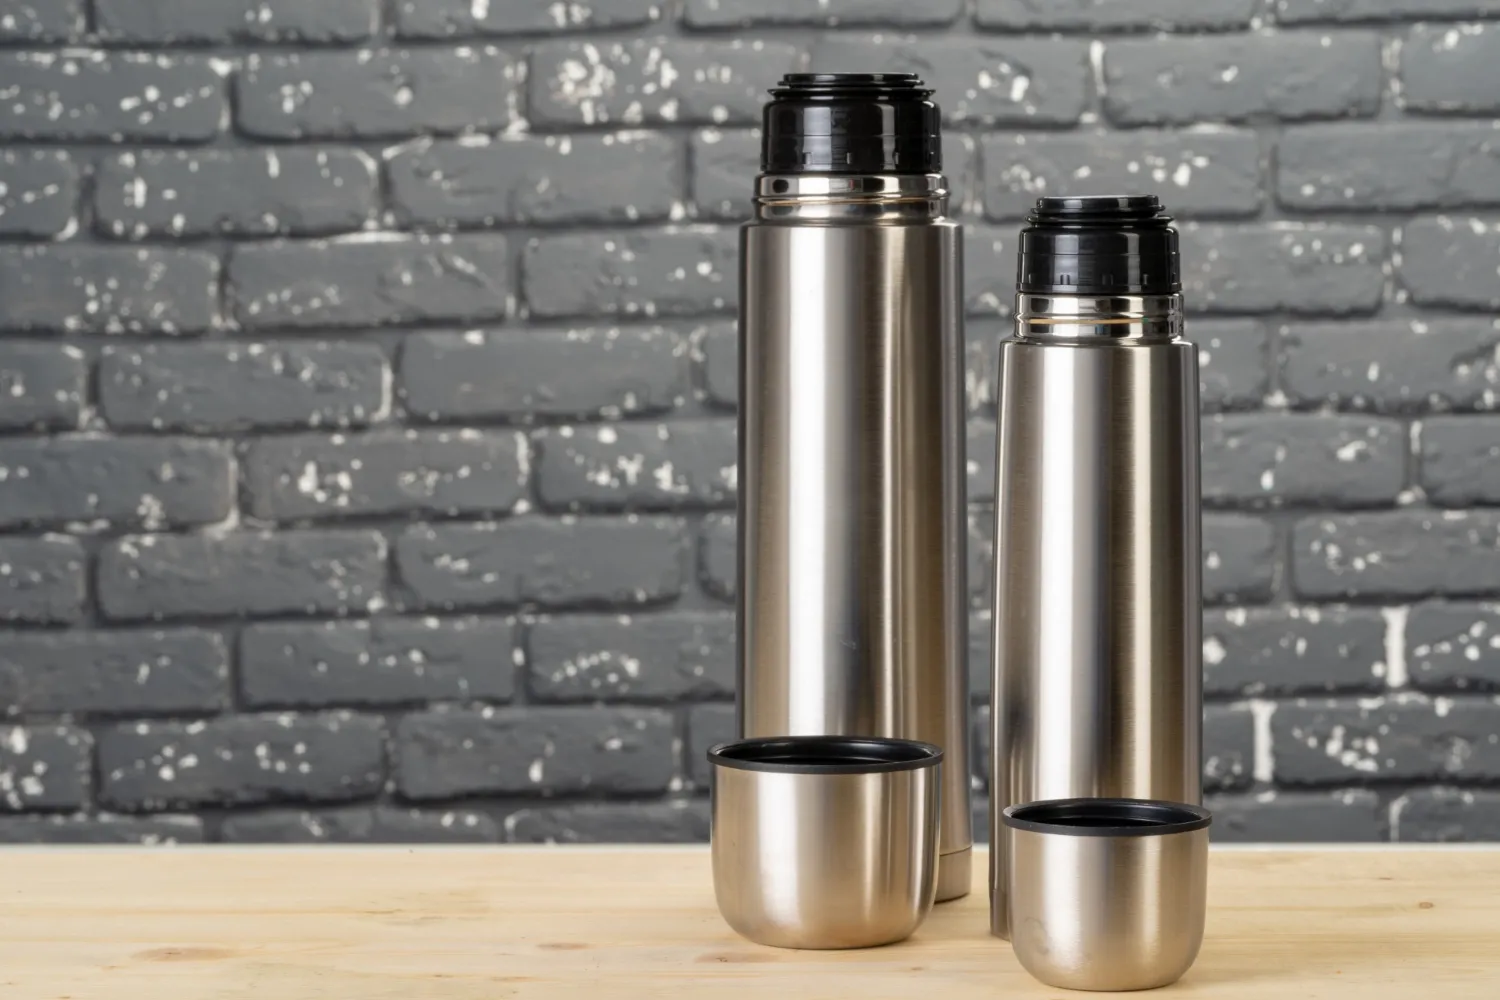 Aluminum metal thermos container bottle close up on table